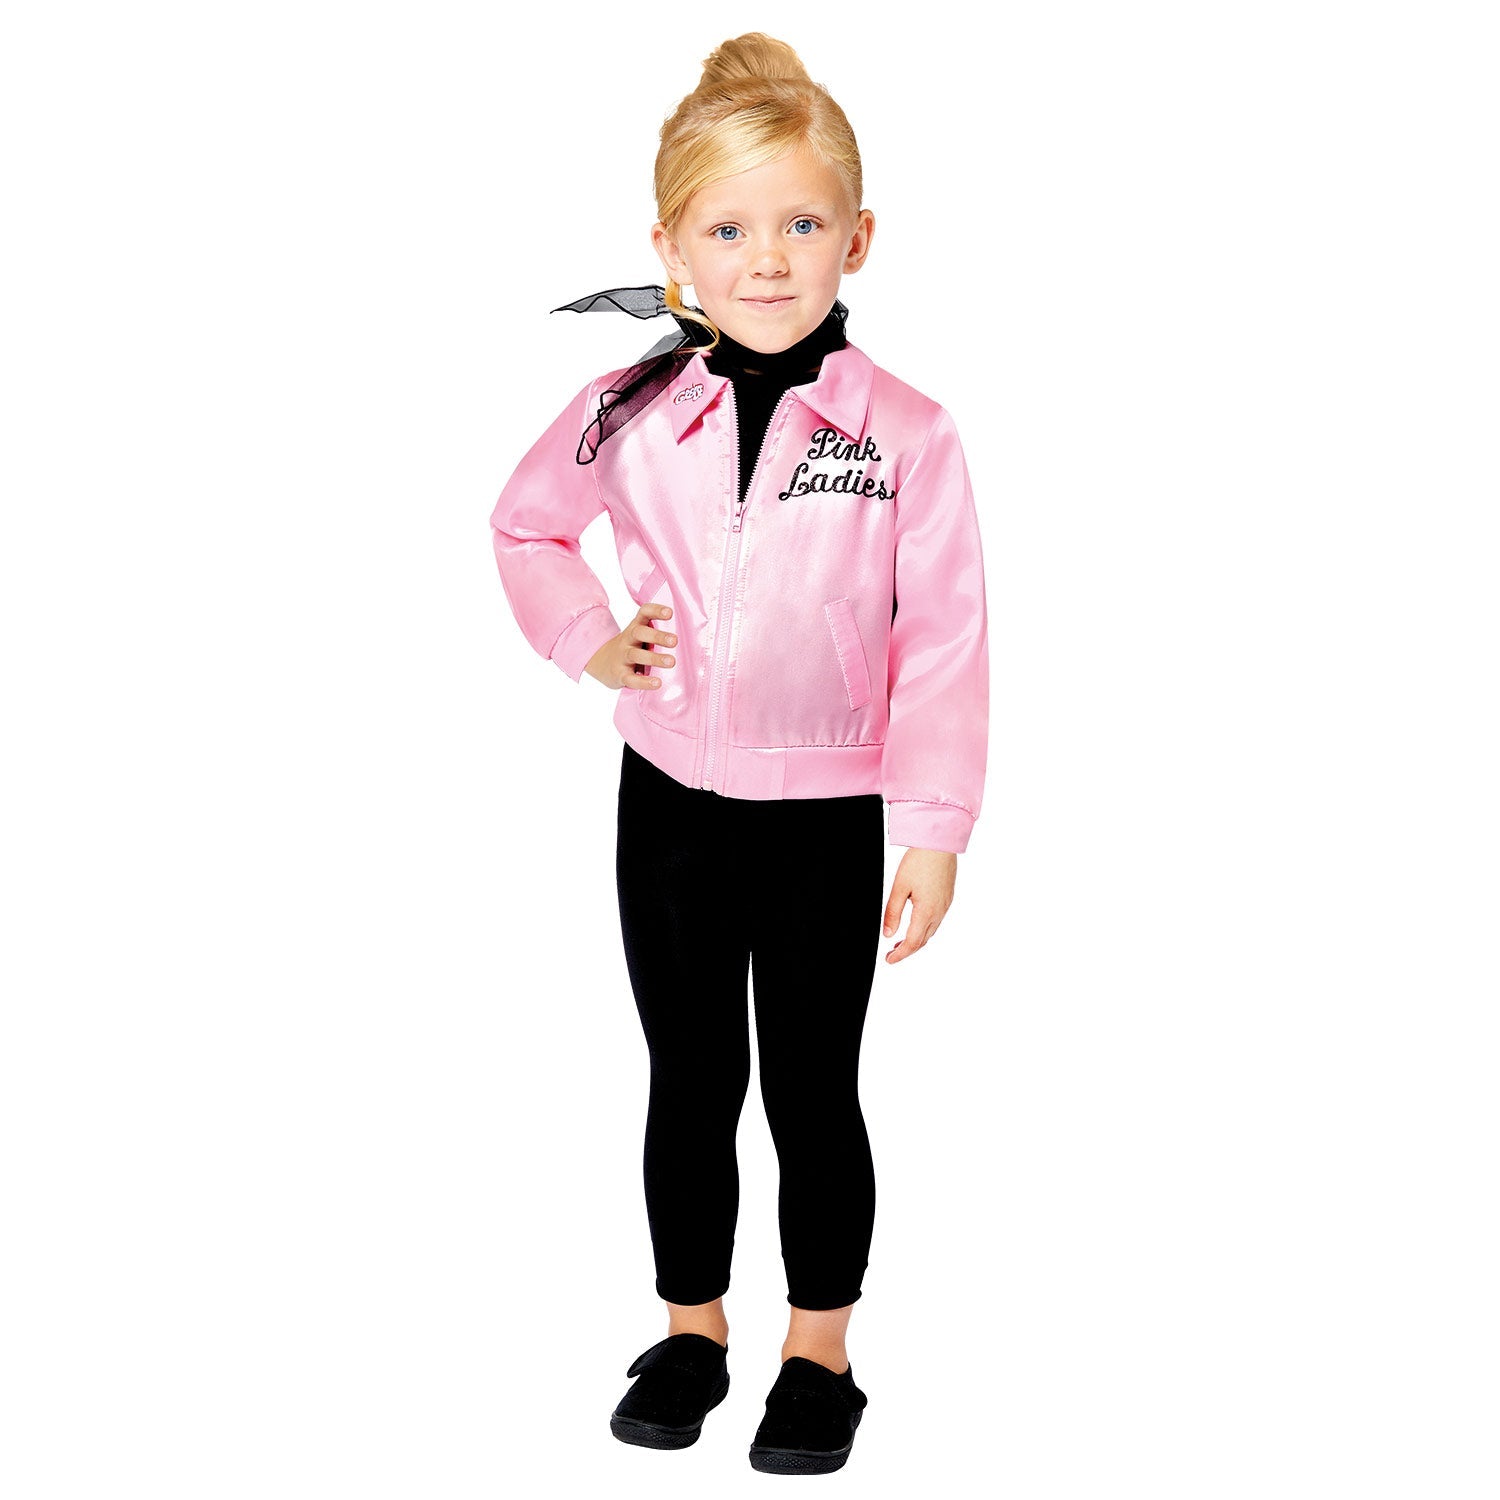 Costume Grease Pink Lady - Child - Jacket Leggings & Scarf